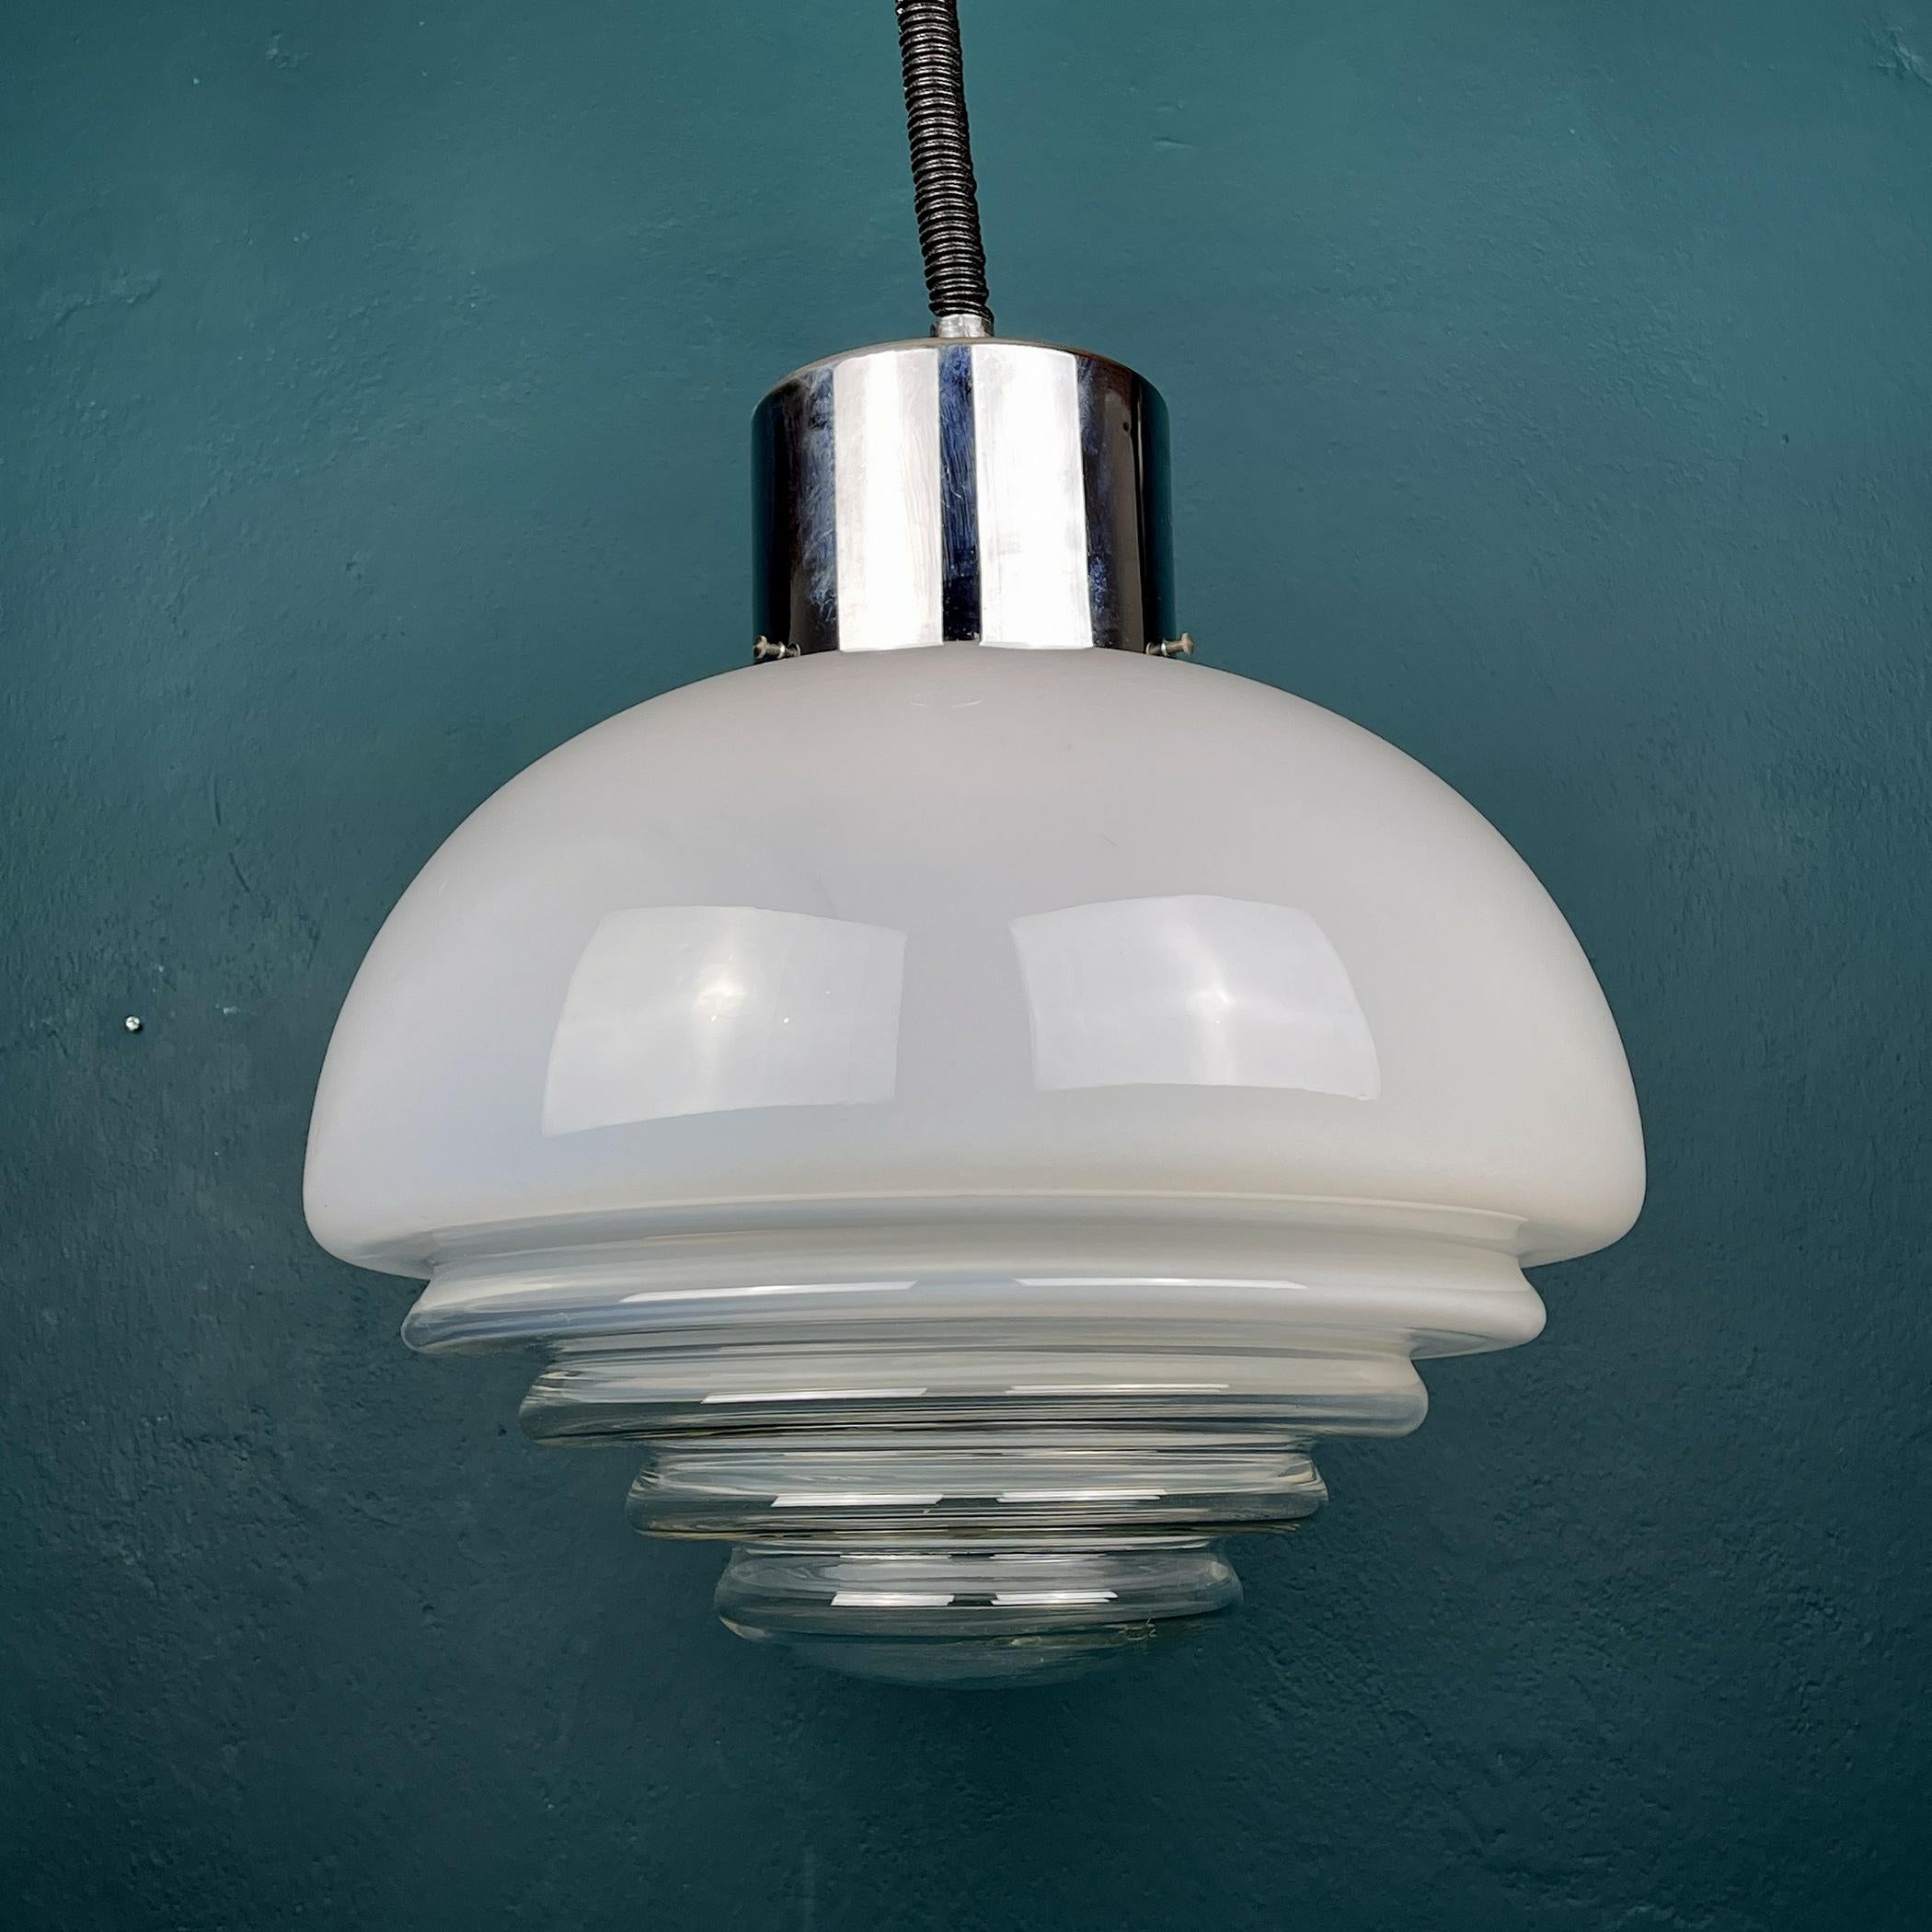 Mid-century milky white Murano glass pendant lamp by Mazzega, made in Italy in the 1970s. The lamp is of a very unusual and rare shape. This perfectly conveys the spirit of the space age, the mid-century style. Excellent vintage condition, no chips